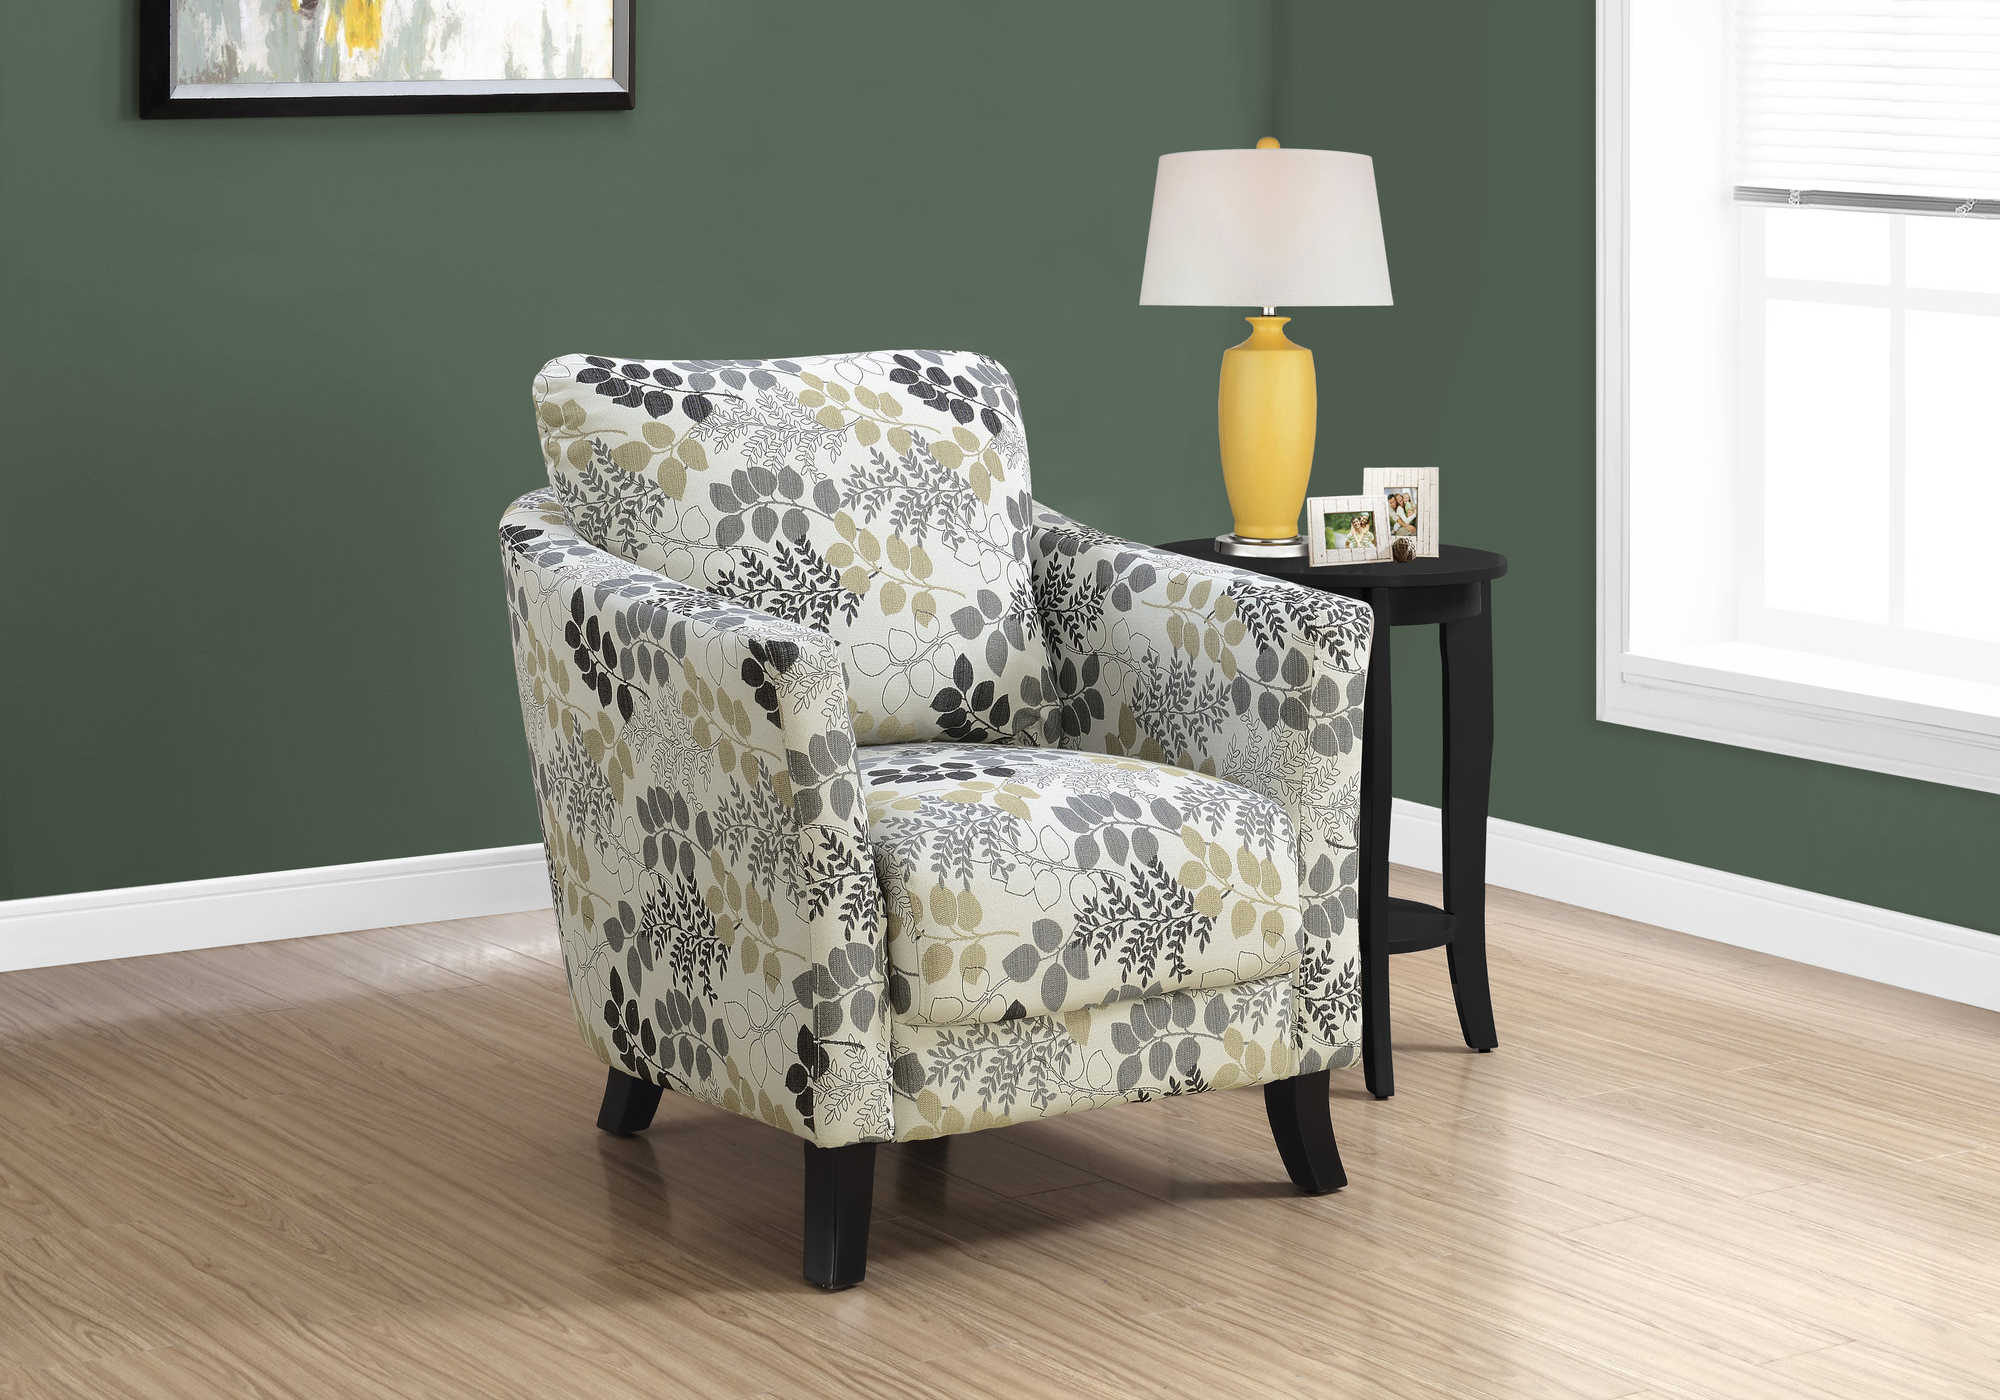 ACCENT CHAIR - EARTH TONE FLORAL FABRIC